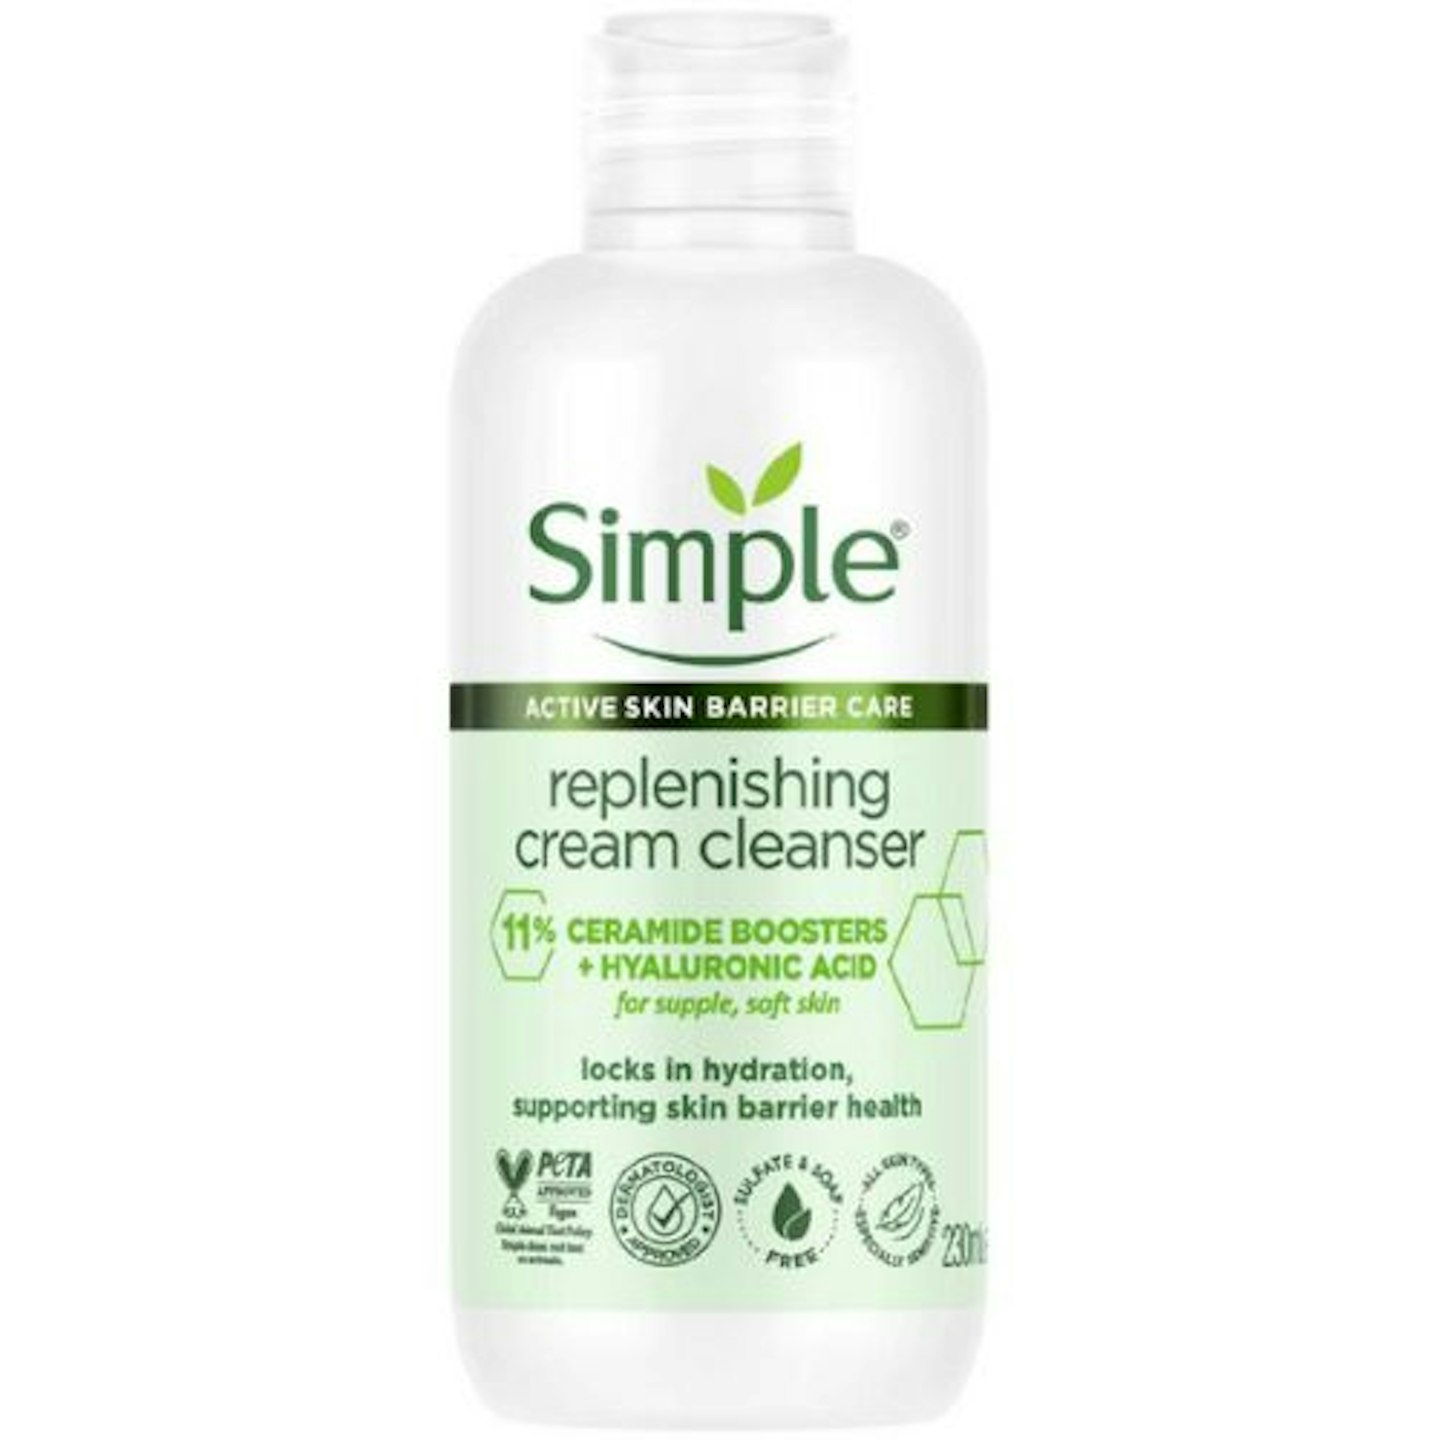 Simple Replenishing Cream Cleanser with 11% Ceramide Boosters & Hyaluronic Acid